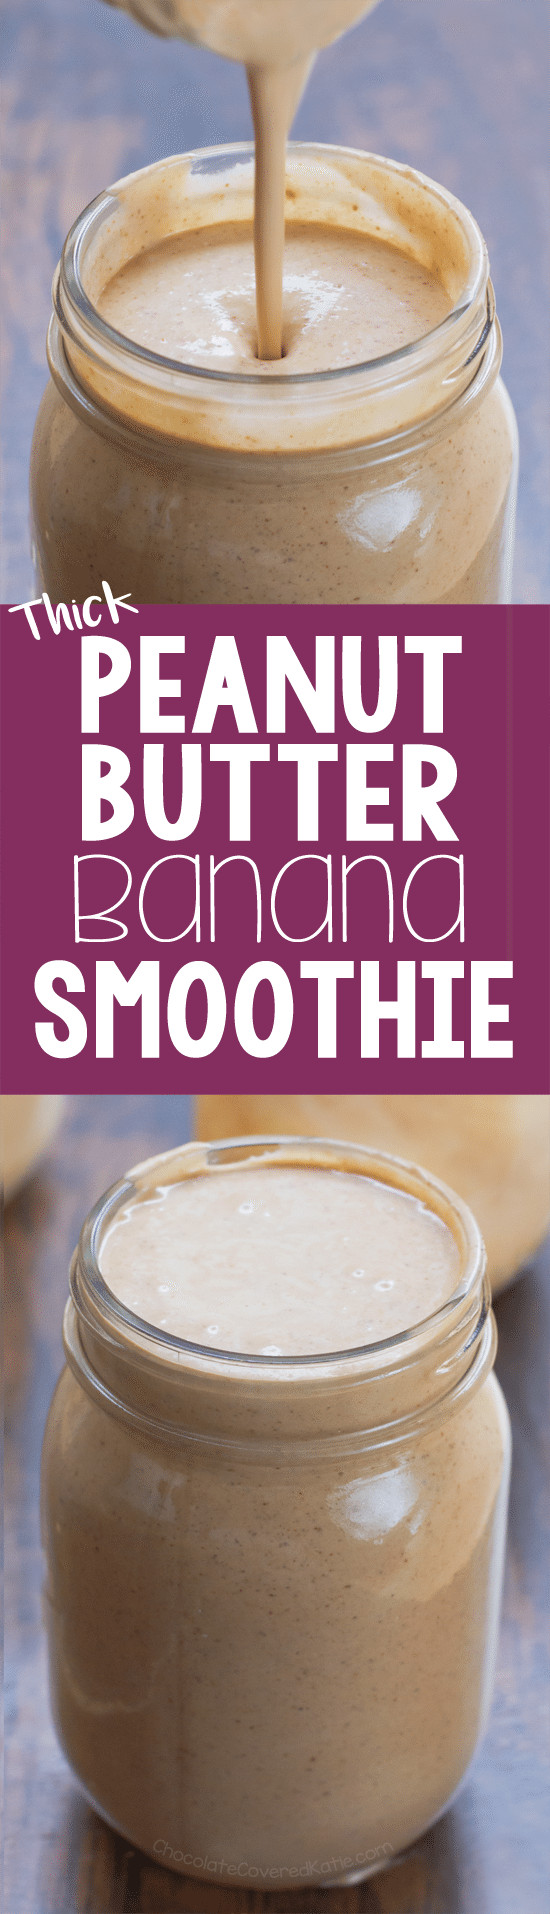 Peanut Butter Smoothie Recipes
 Peanut Butter Banana Smoothie Easy To Make